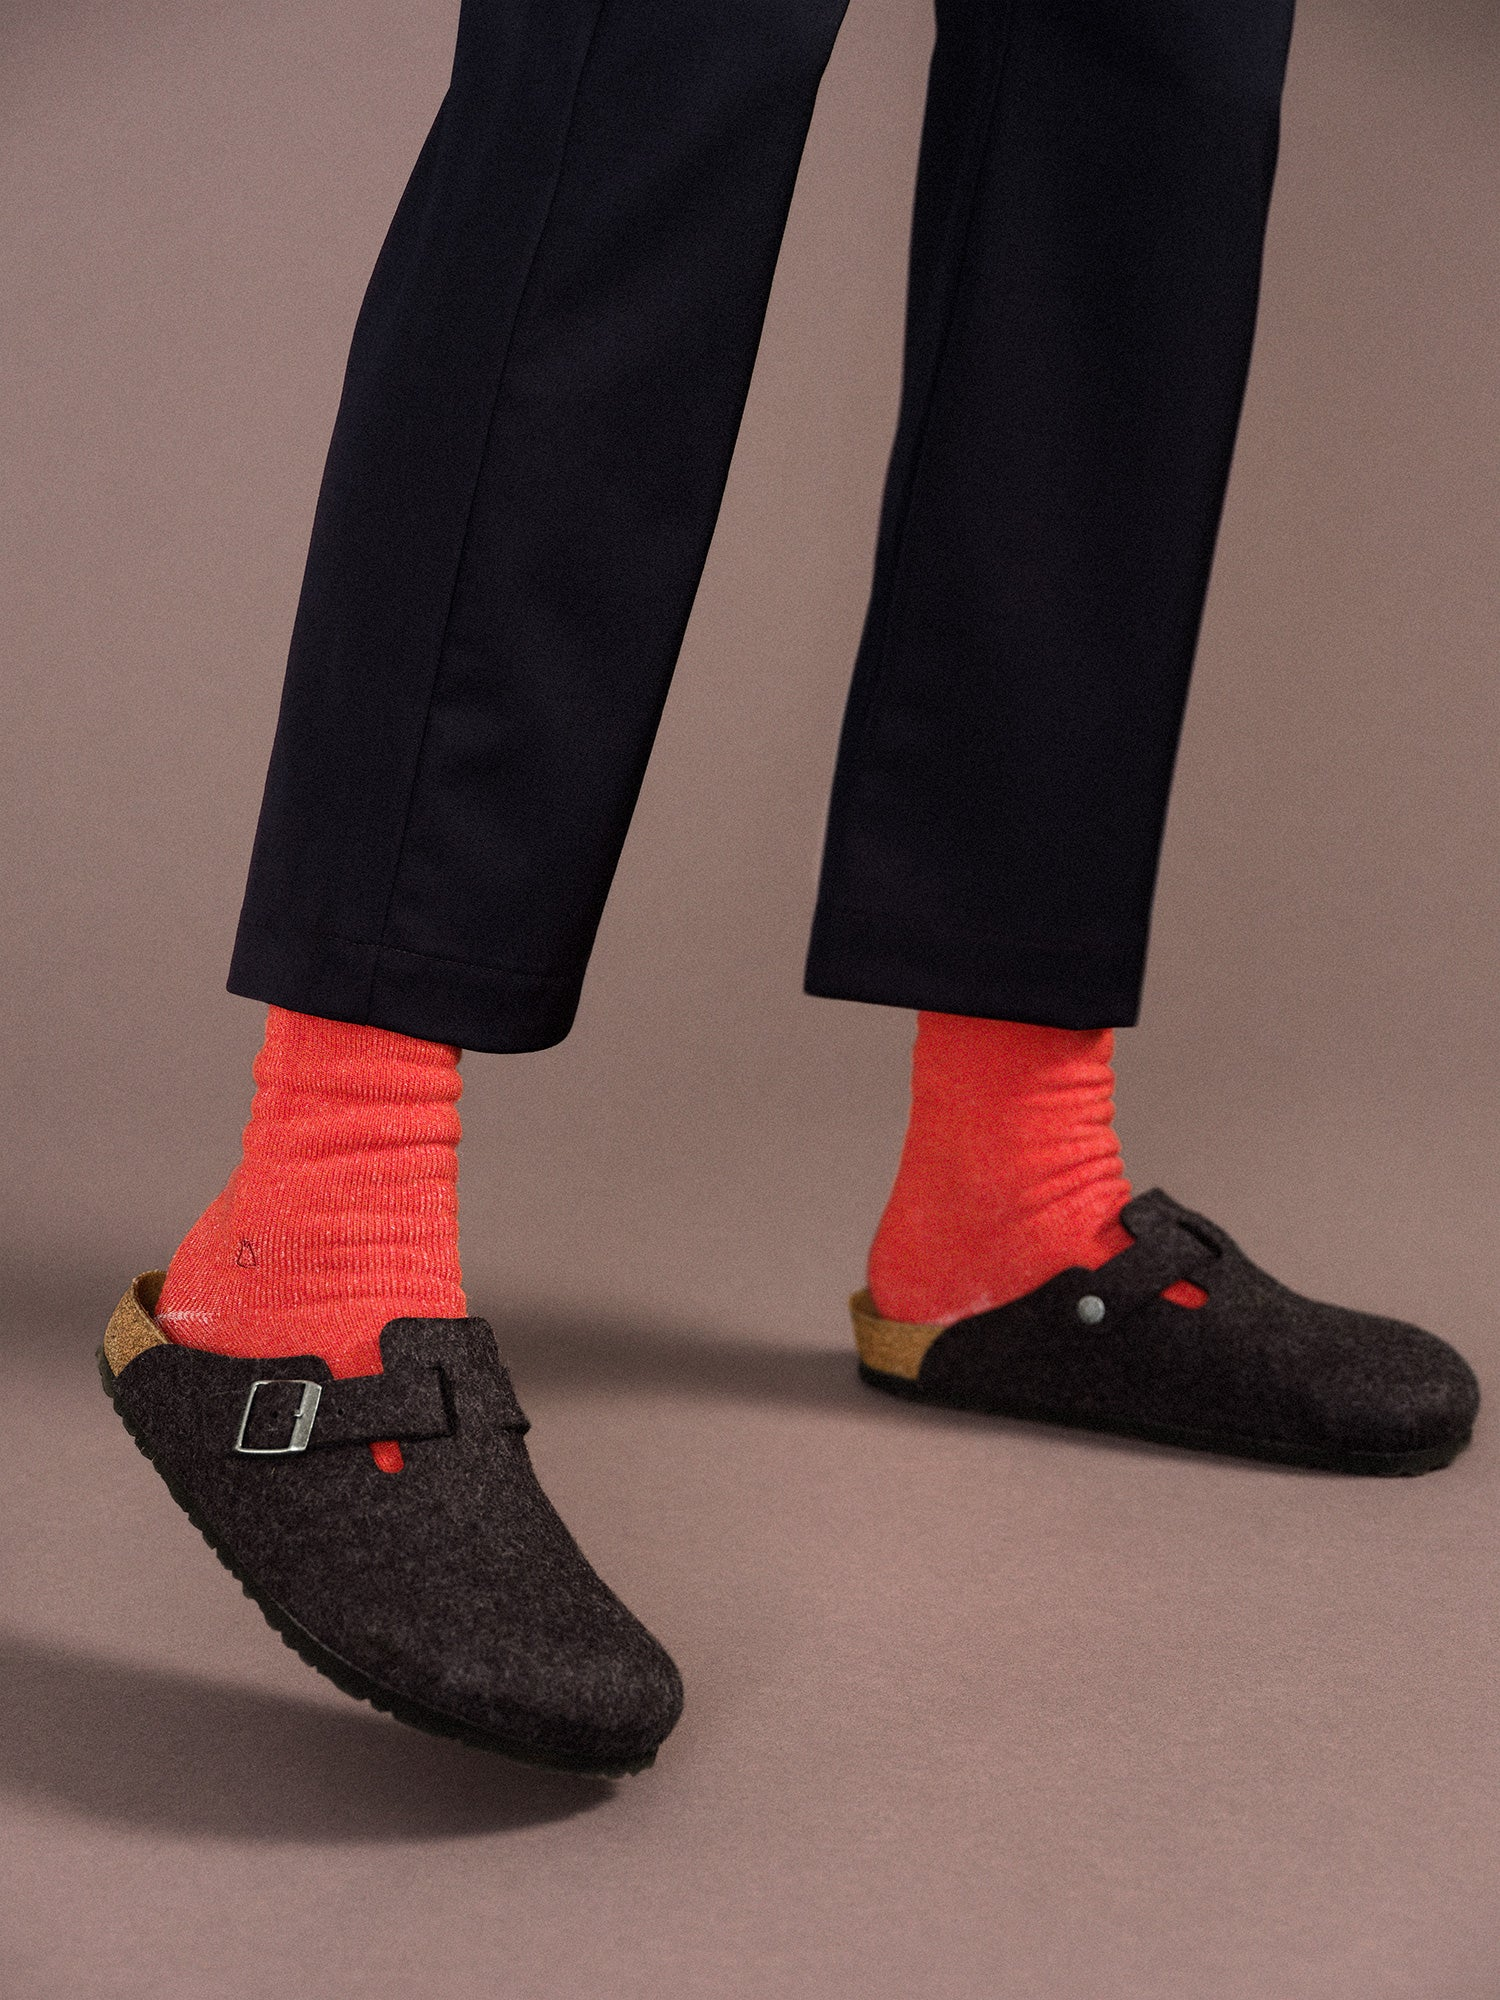 image shows a person wearing dark pants and shoes with the socks providing a nice contrast 